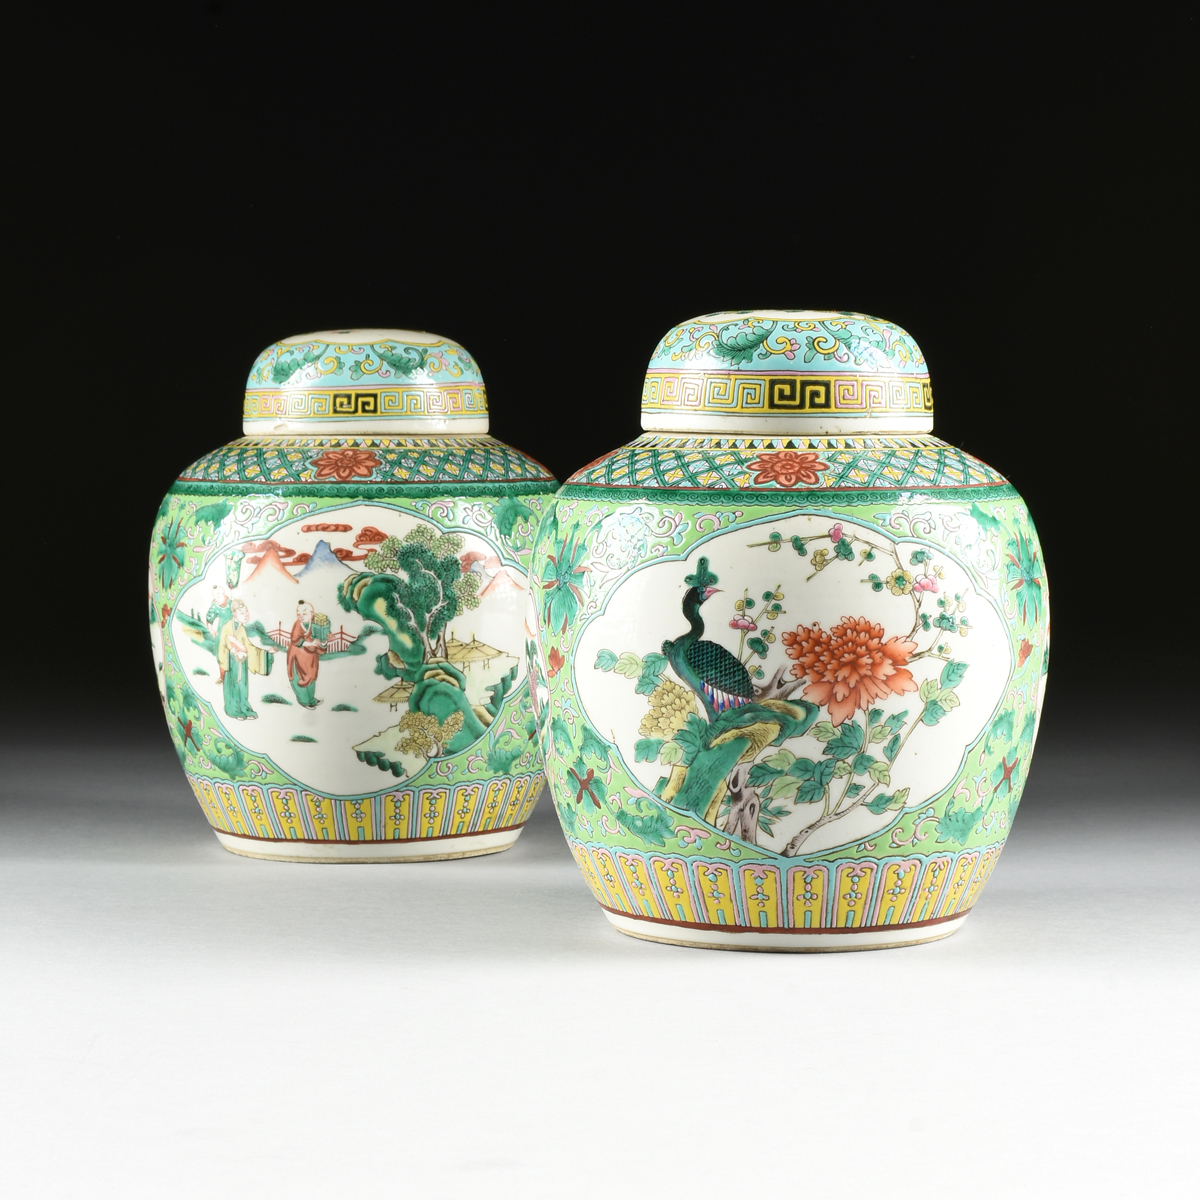 A PAIR OF CHINESE "FAMILLE VERTE" PORCELAIN GINGER JARS WITH LIDS, REPUBLIC PERIOD CIRCA 1917- - Image 3 of 14